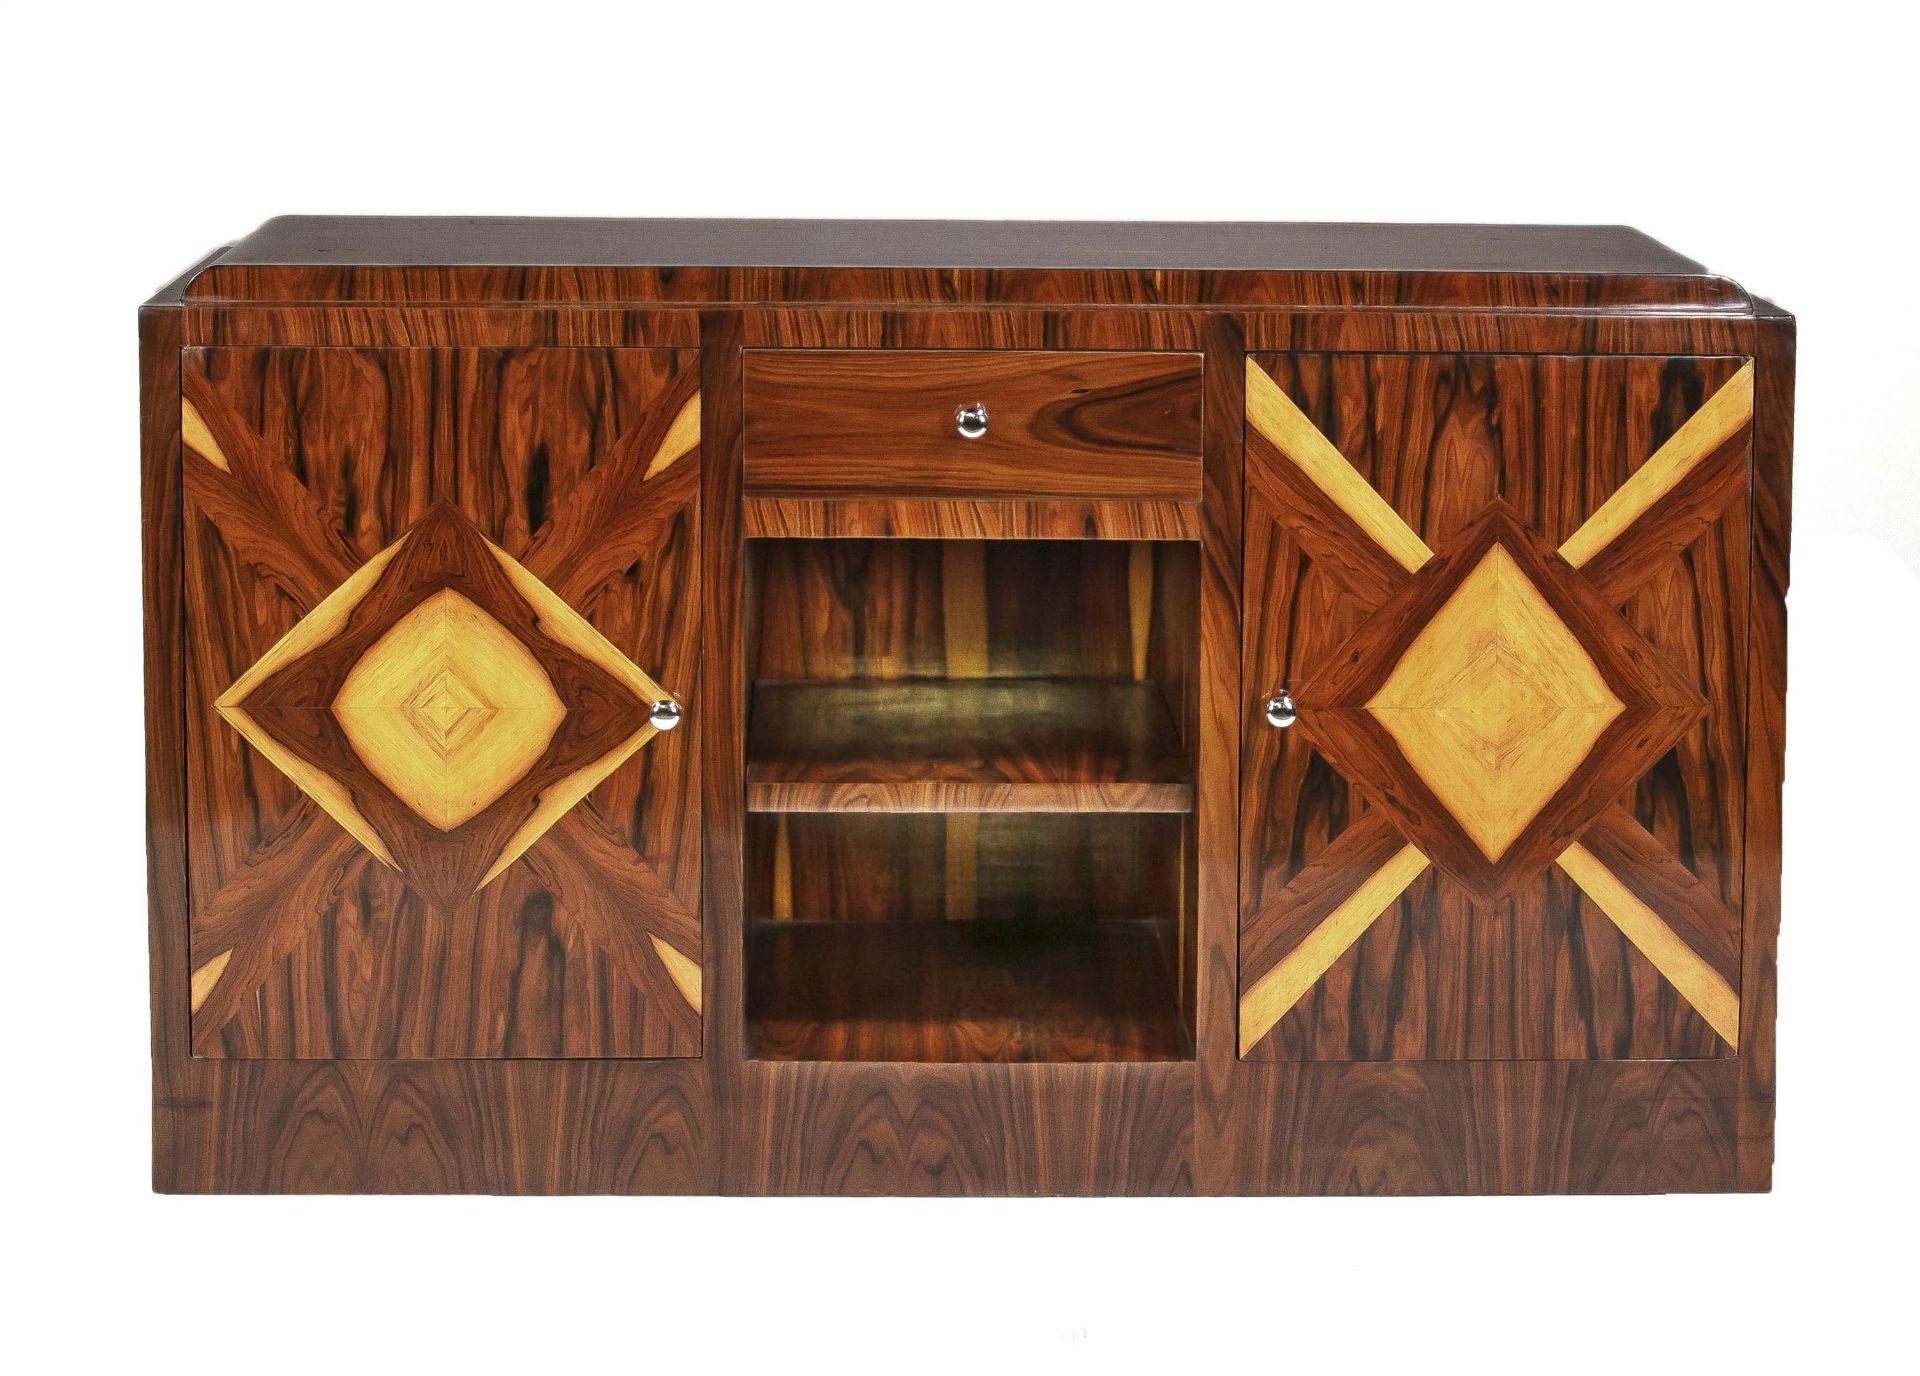 Sideboard in art deco style, end of 20th century, Indian 2-color rosewood veneer, 82,5 x 151 x 45